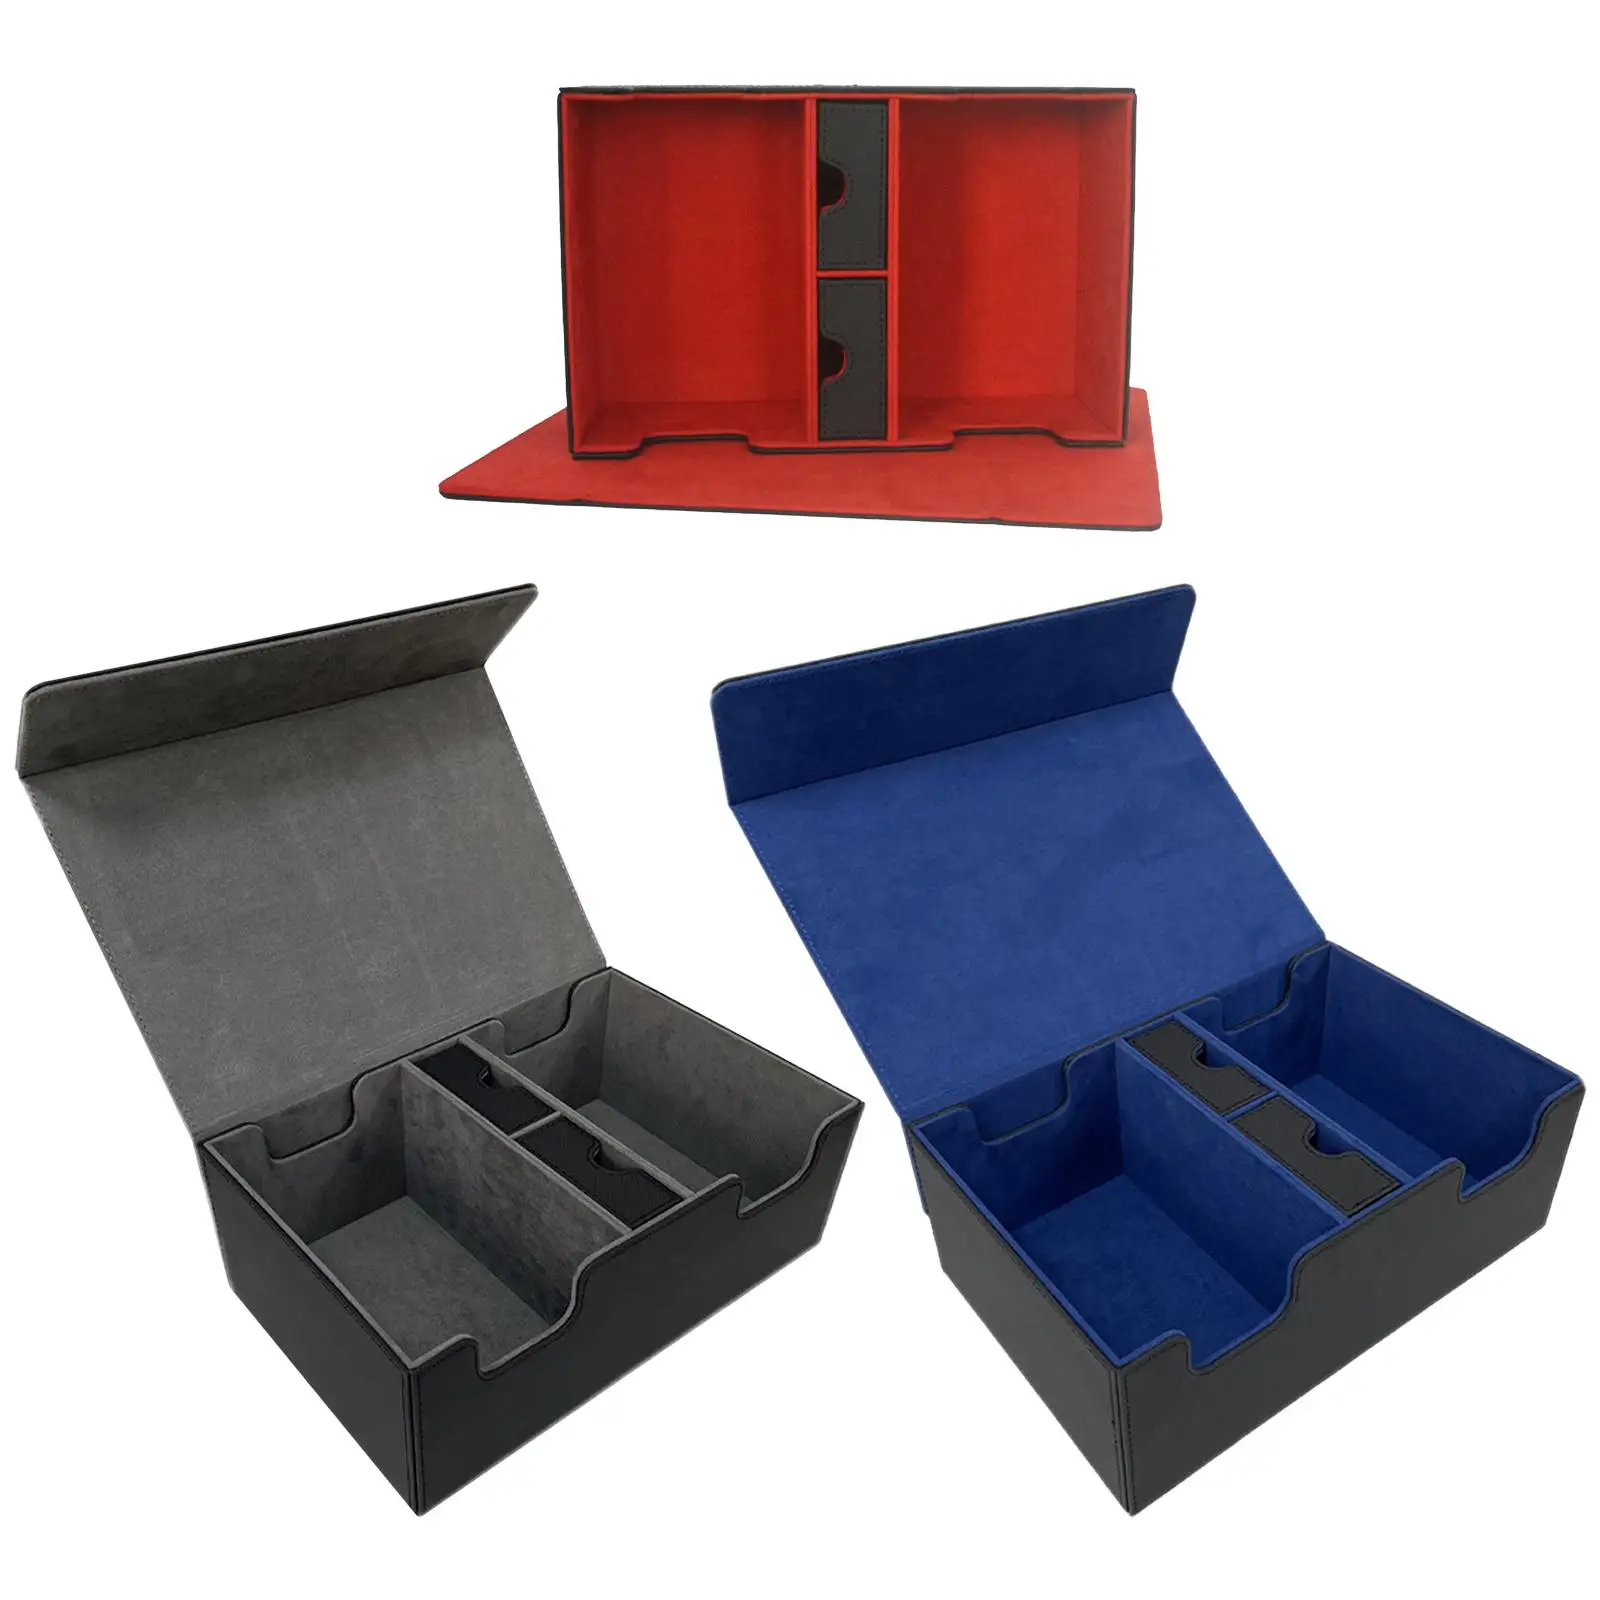 PU Leather Card Storage Case Holder Two Compartments Holds up to 400 Cards